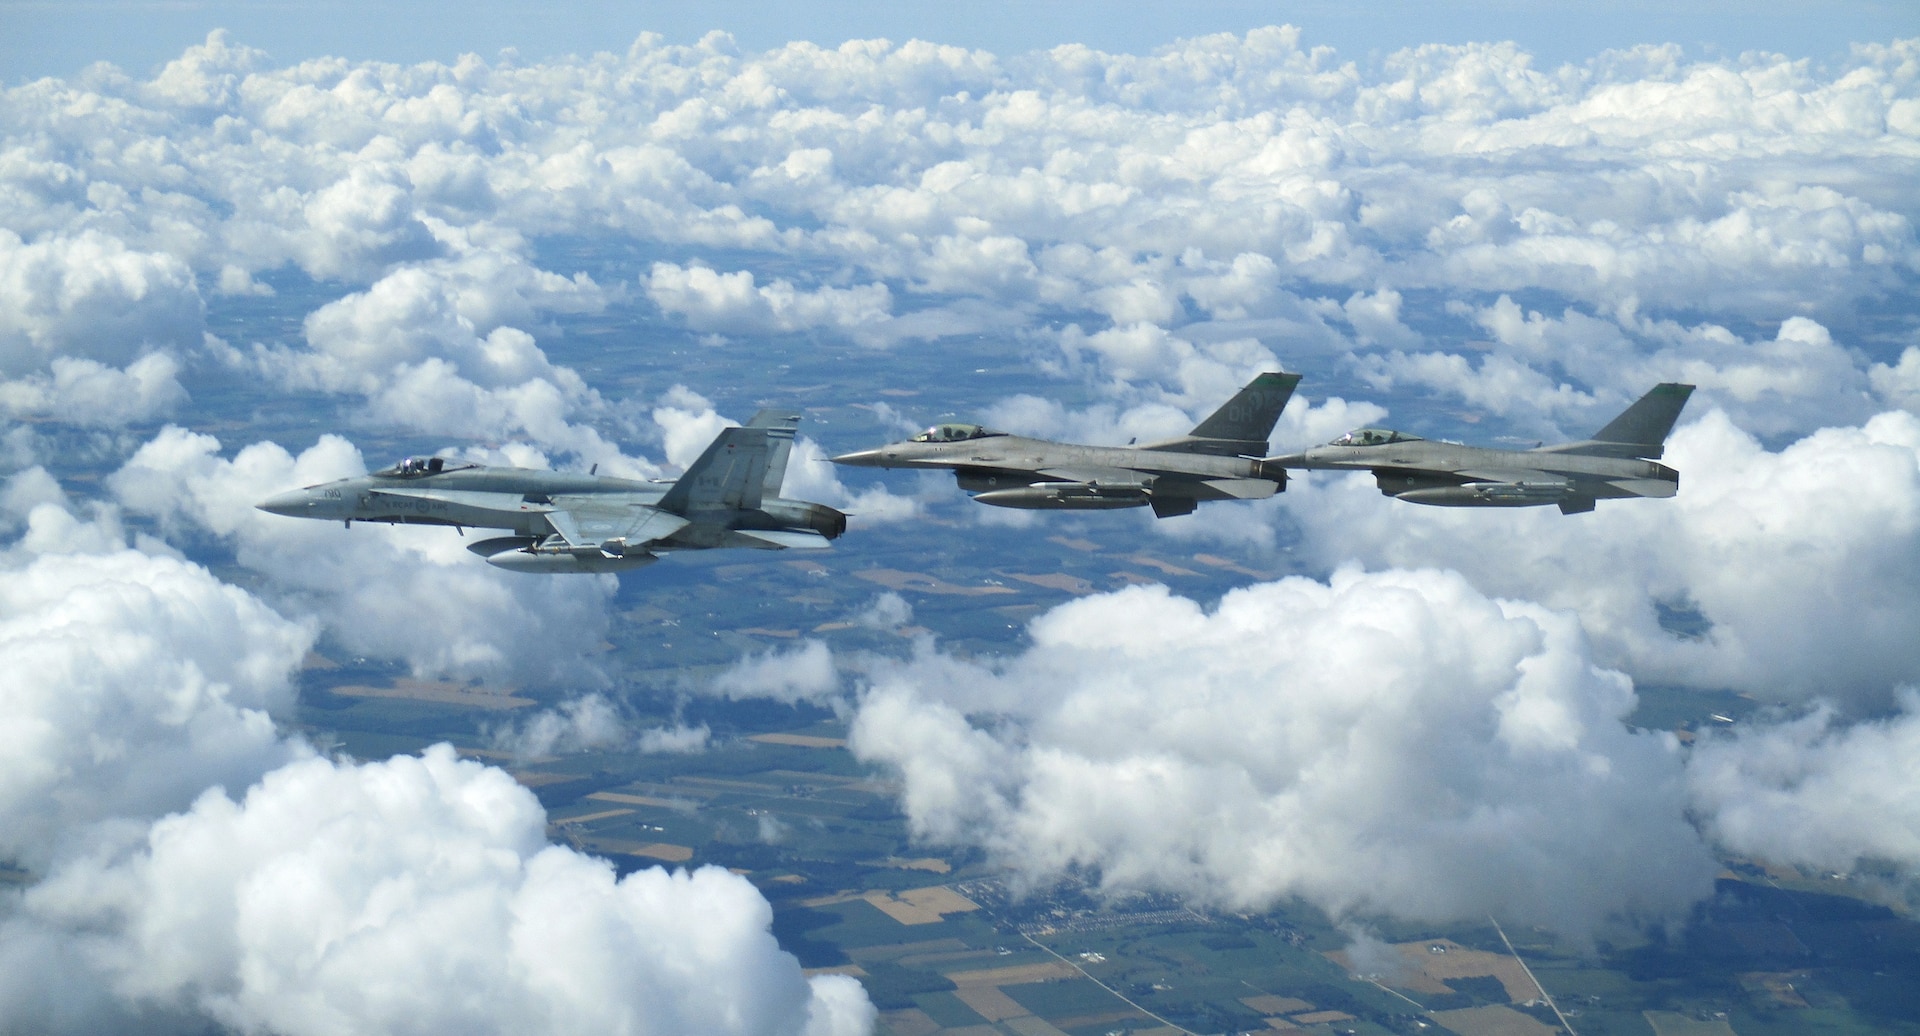 Royal Canadian Air Force CF-18 and United States Air Force F-16s participate in binational NORAD air defence exercise conducted over the Greater Toronto Area on July 30, 2020.(Photo courtesy of CANR Public Affairs)